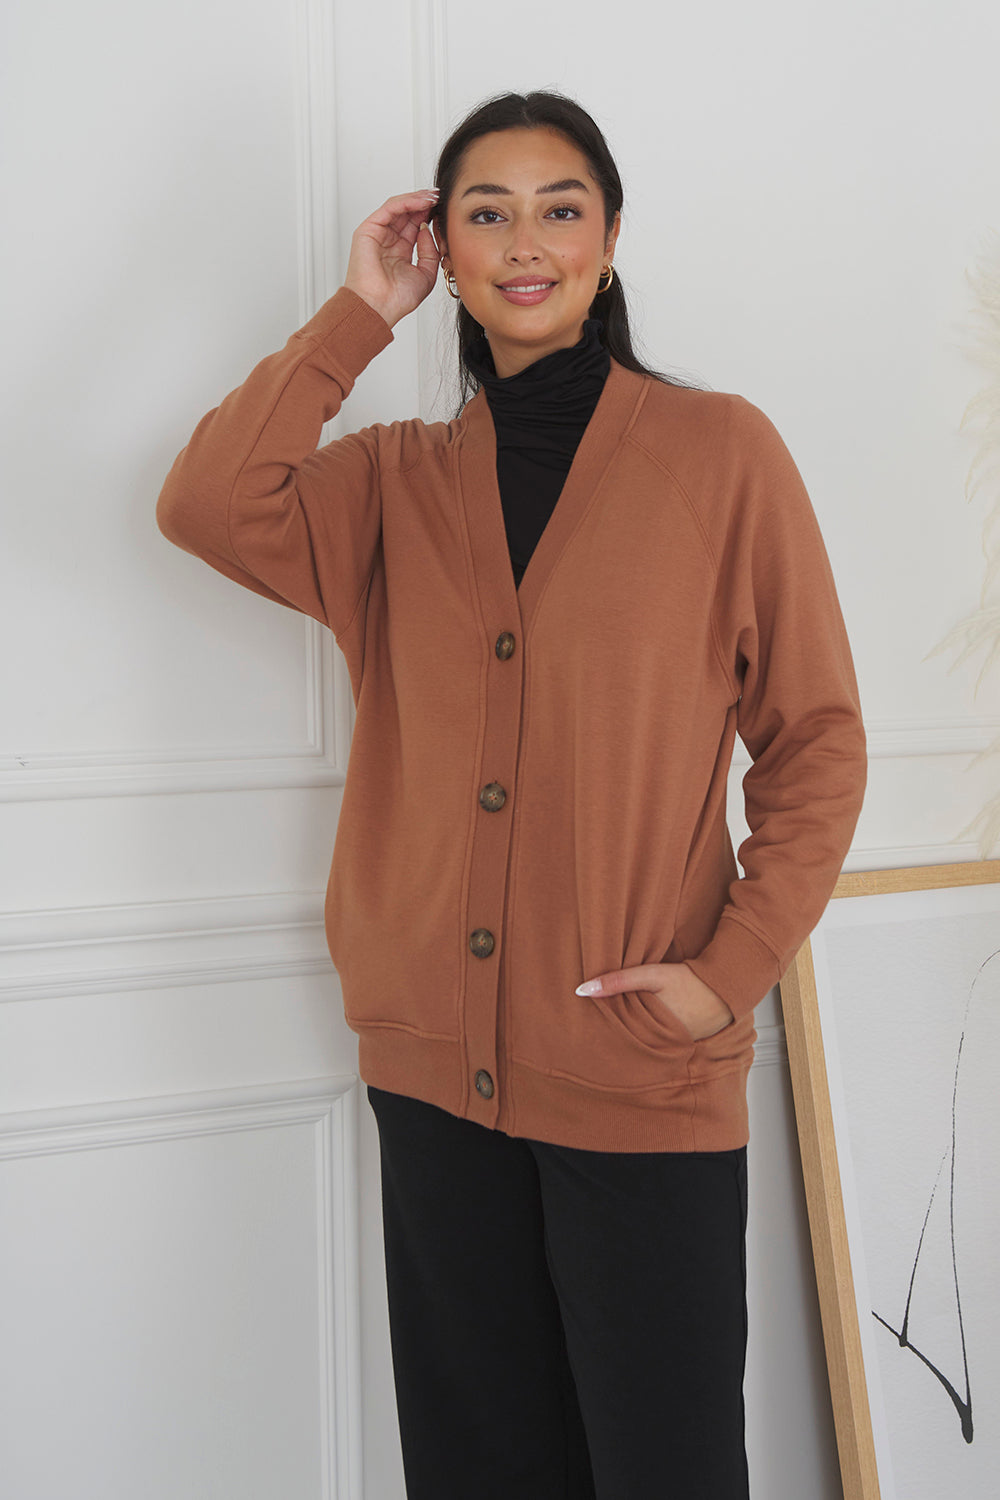 Women’s soft and luxurious bamboo cardigan sweater in the colour Warm Brown made by Terrera.